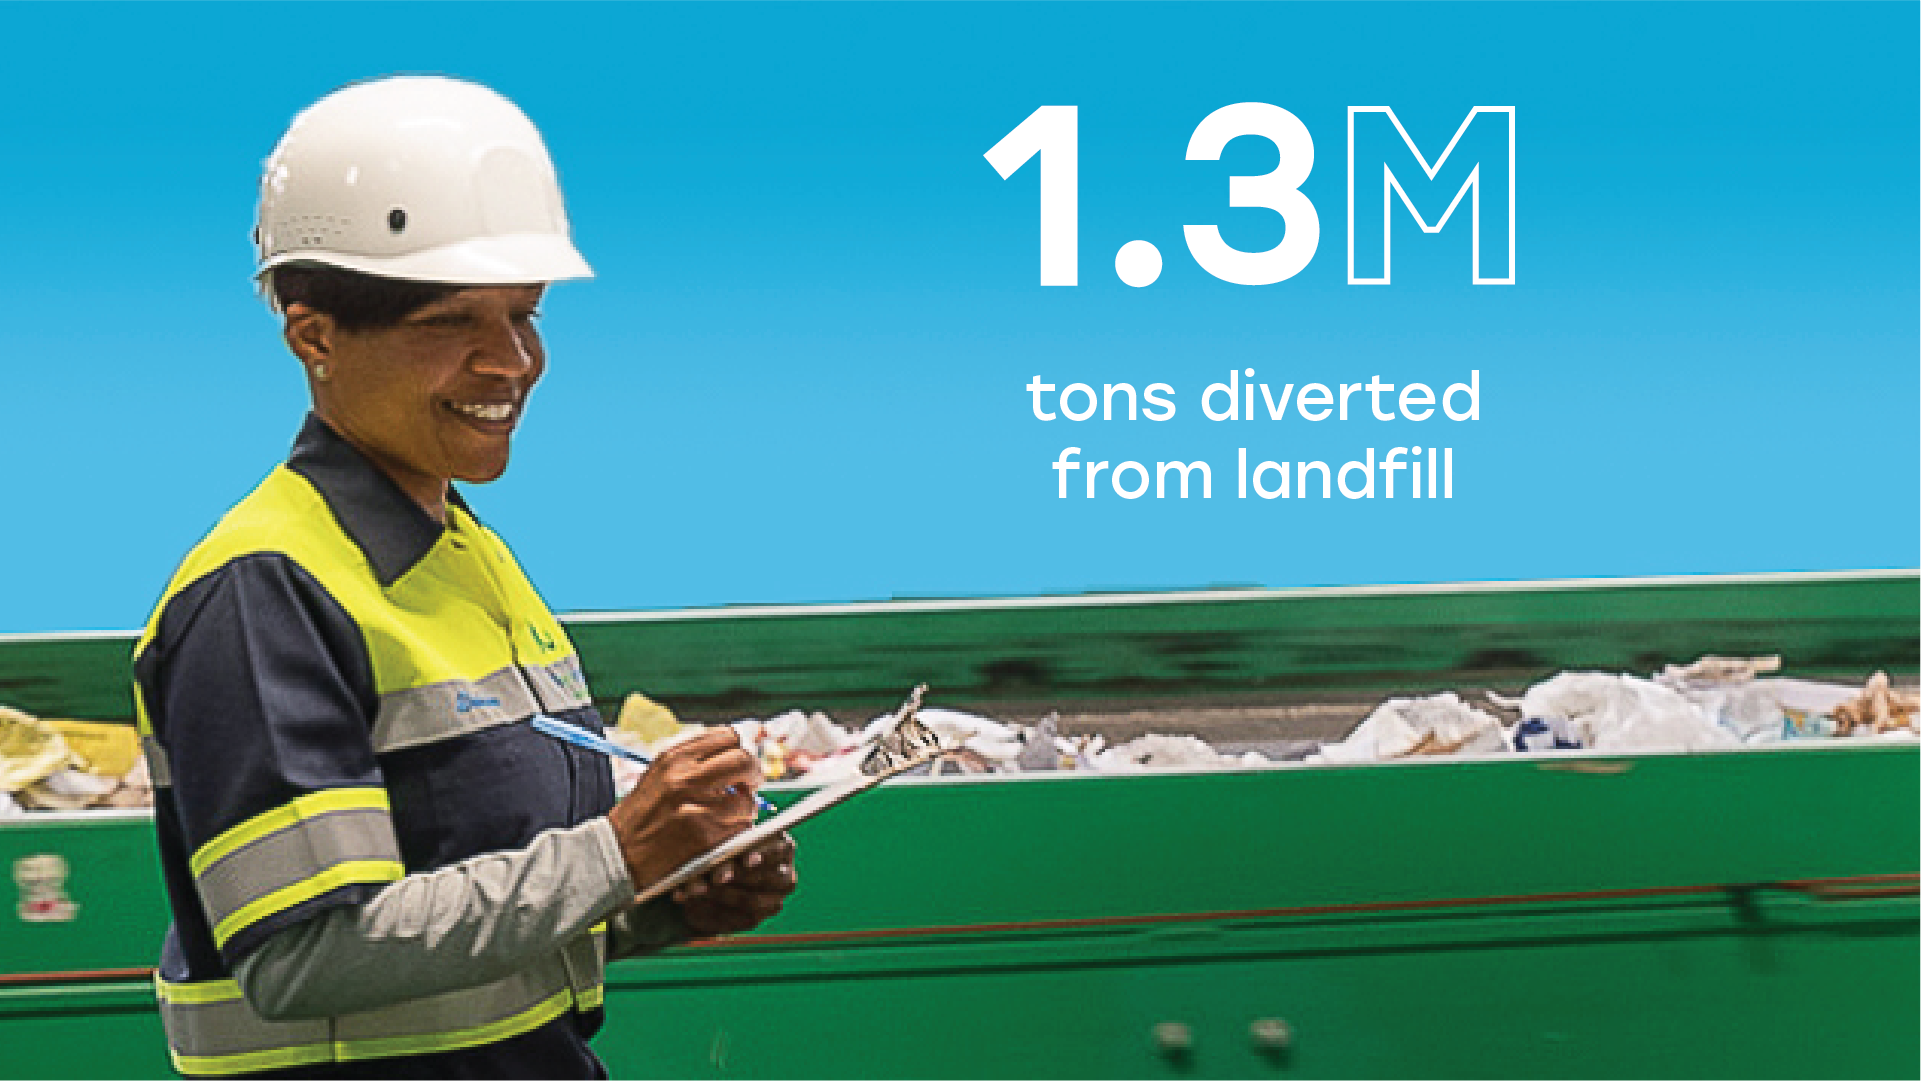 1.3 million tons diverted from landfill